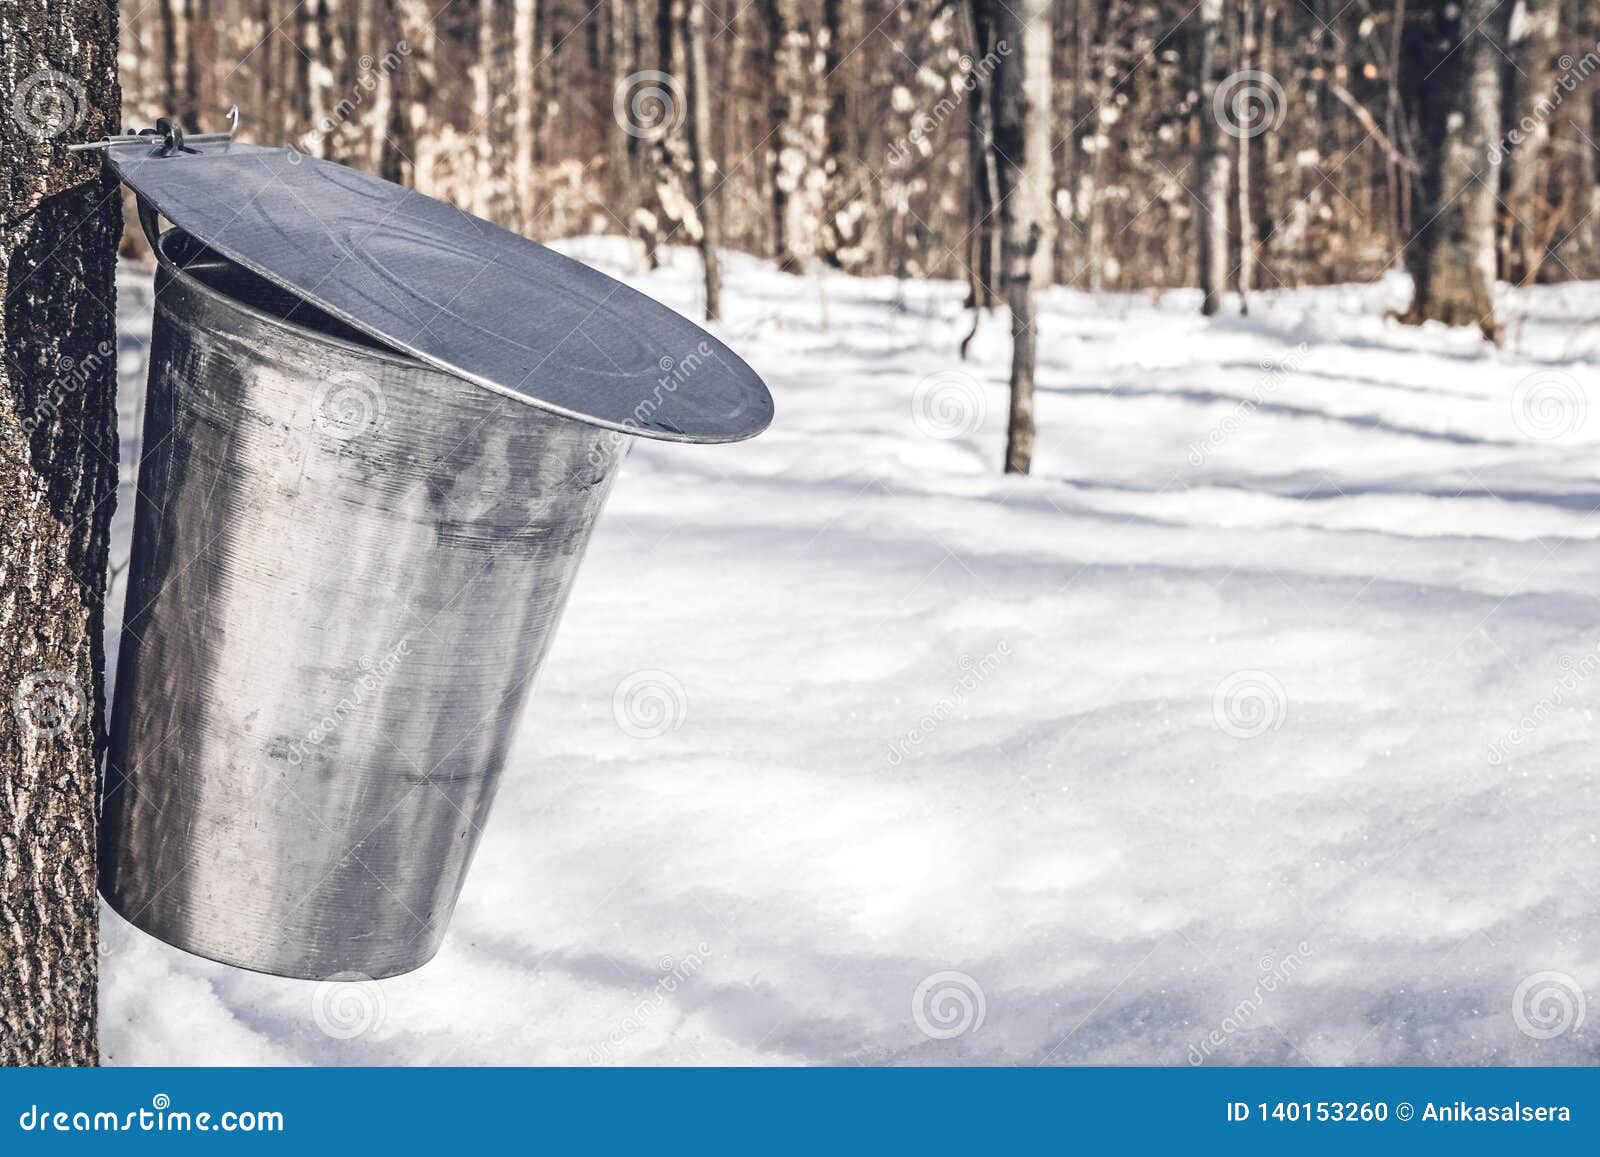 collecting sap for traditional maple syrup production